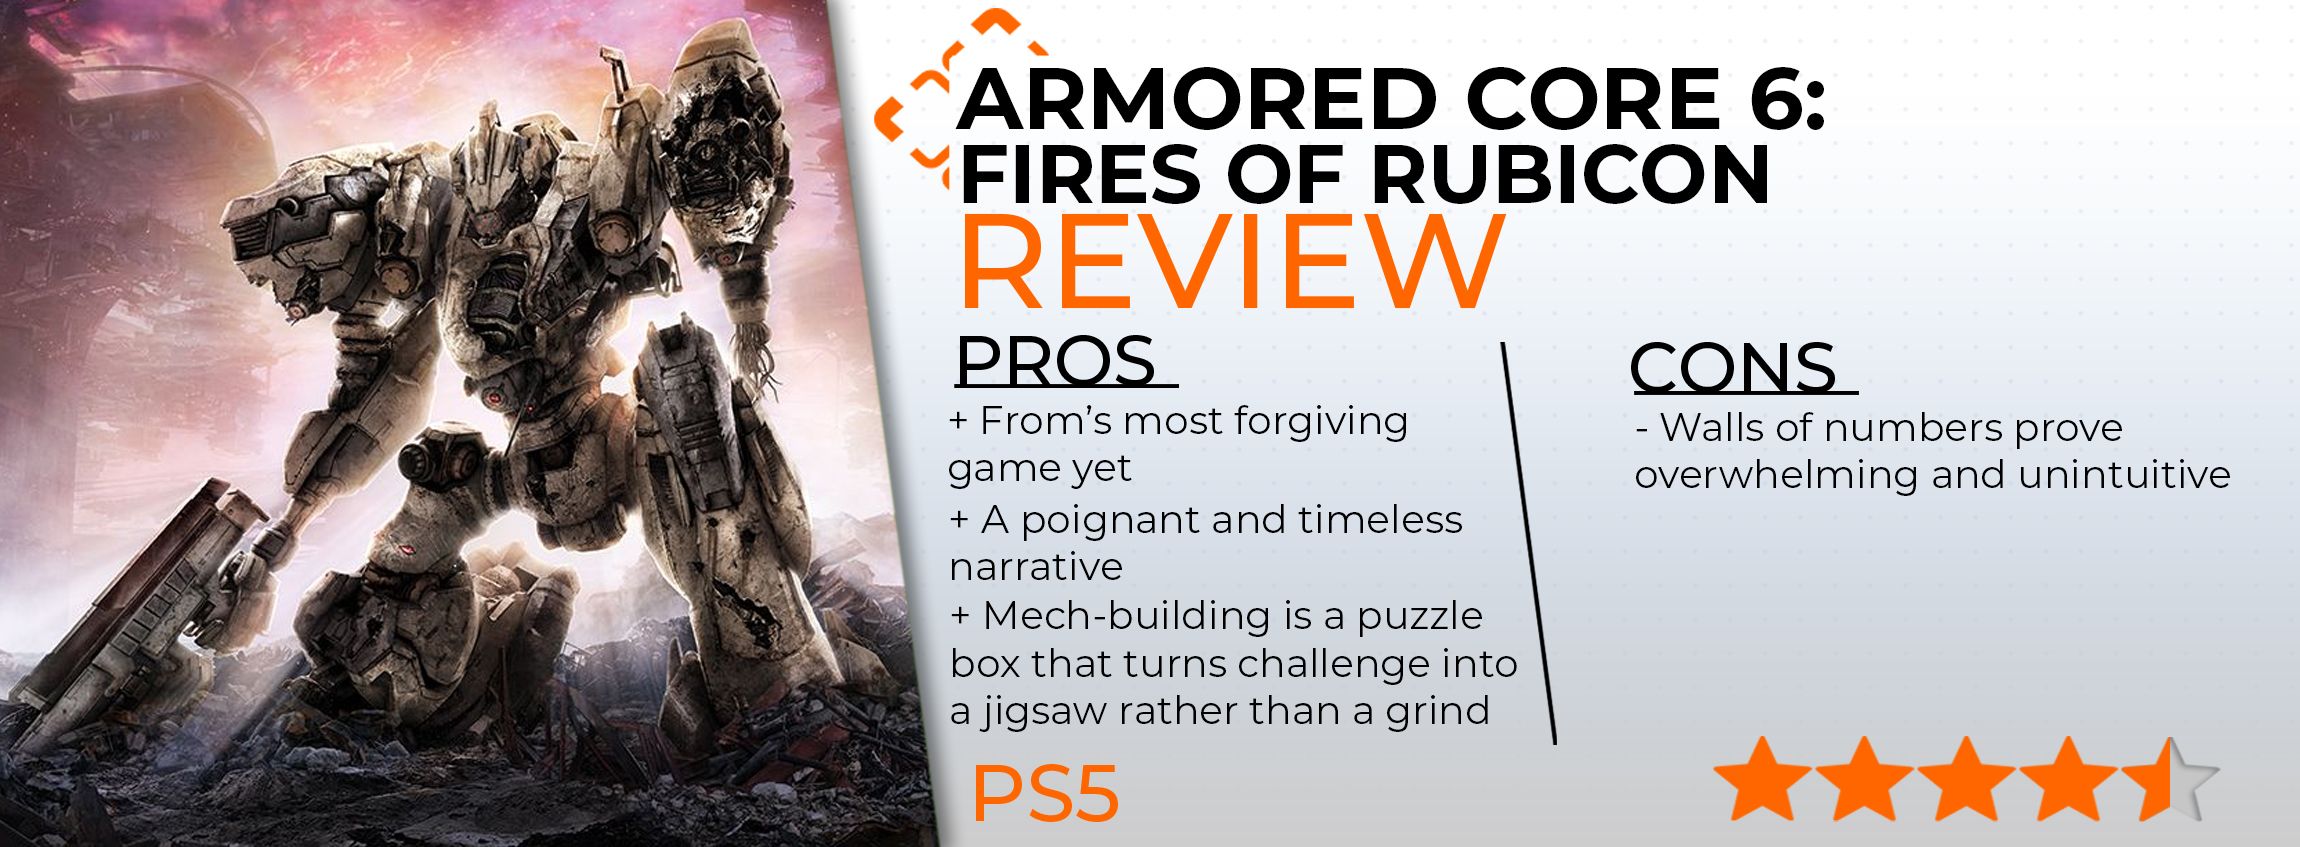 Armored Core 6 Fires of Rubicon review: mechs at their best : NPR